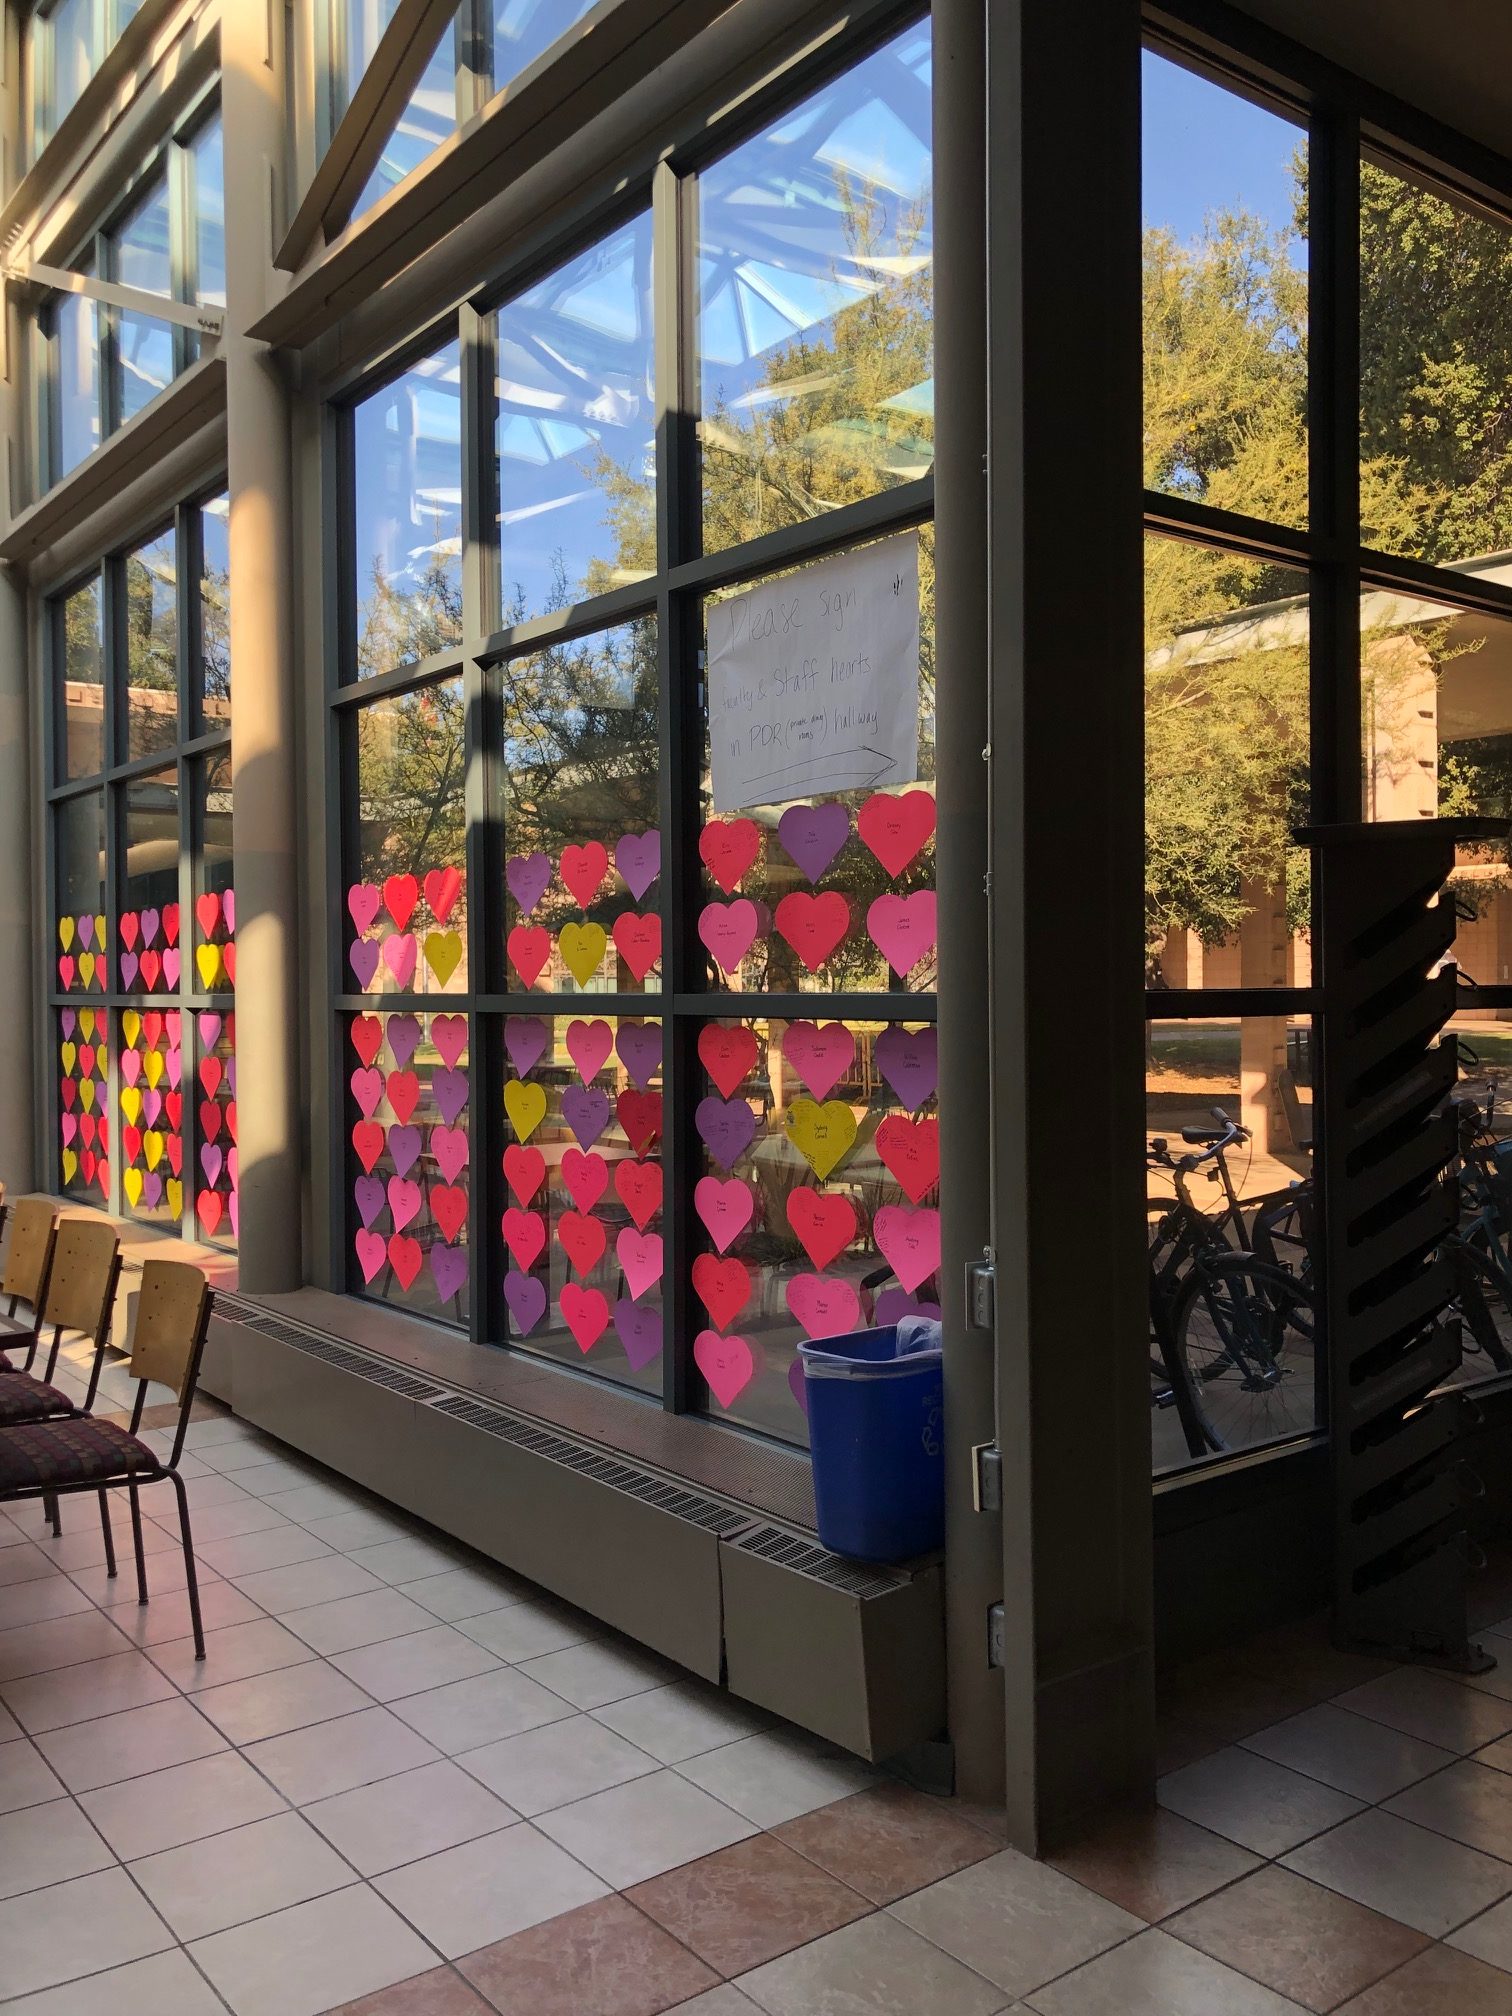 A wall of windows, with pink, purple, red, and yellow cut-out hearts on it